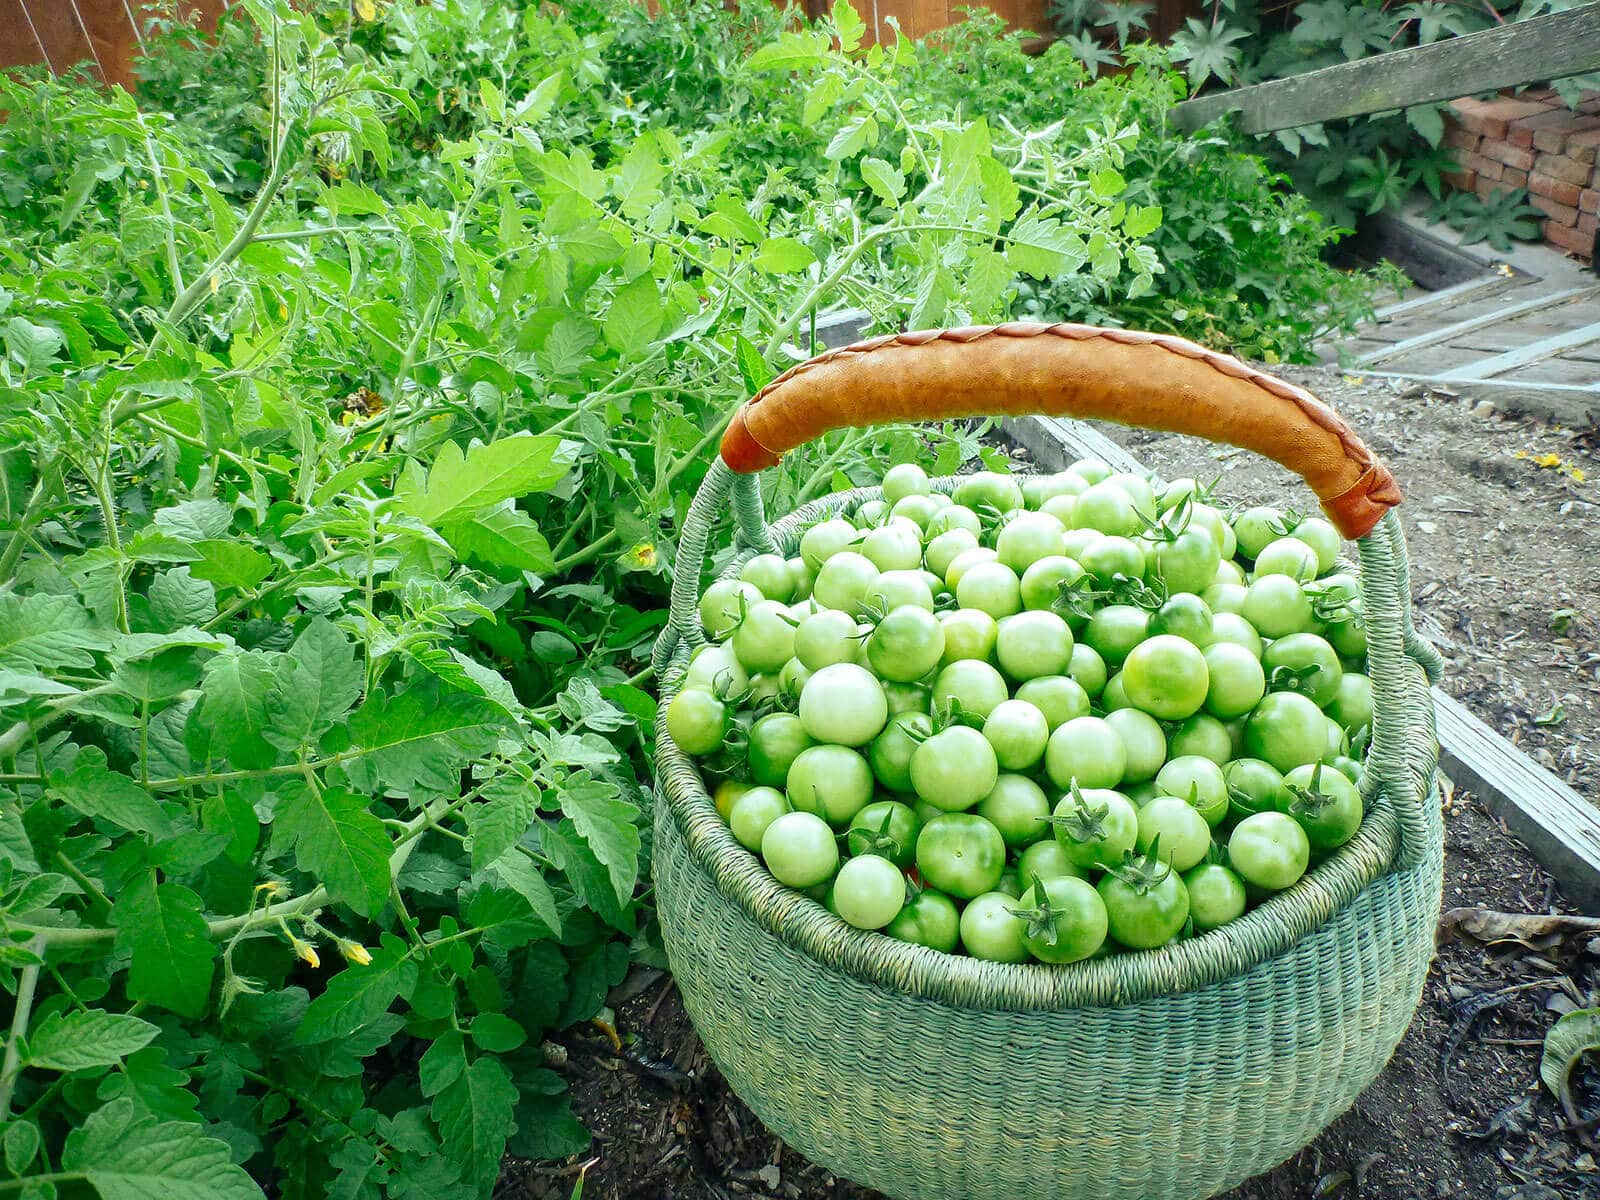 Basket of green cherry tomatoes harvested from the garden